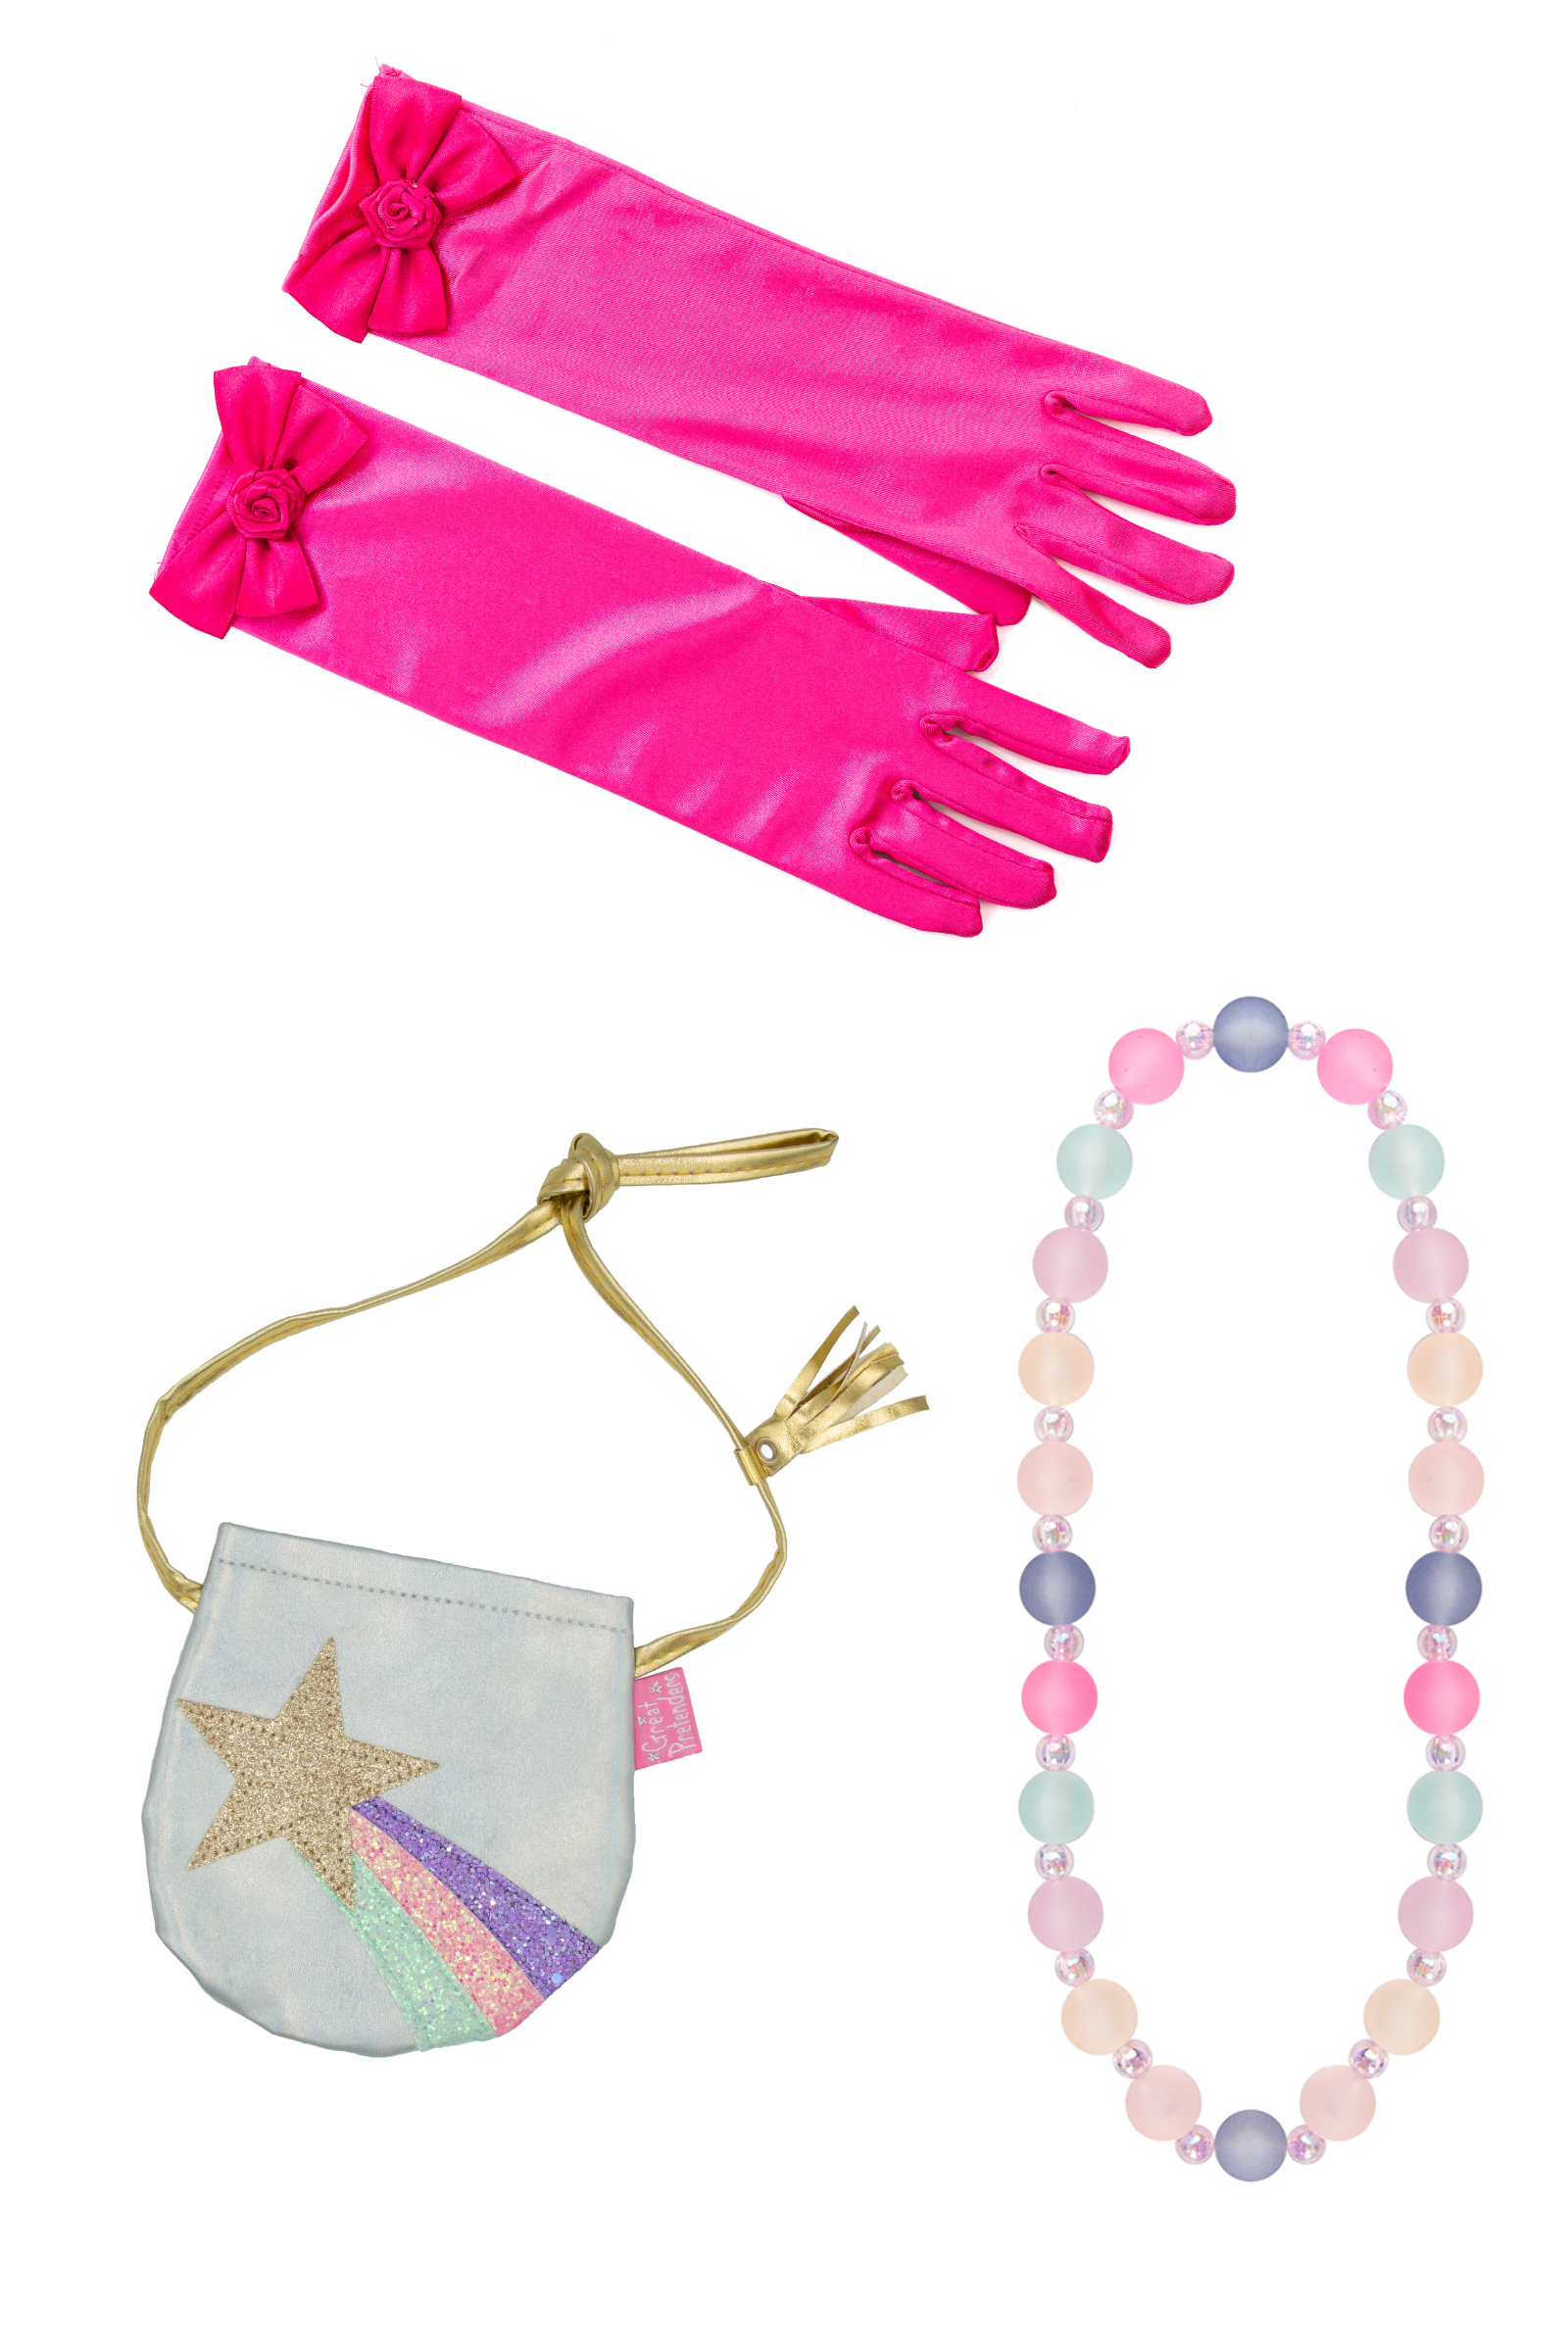 Shining Star Purse, Necklace, and Princess Gloves Bundle